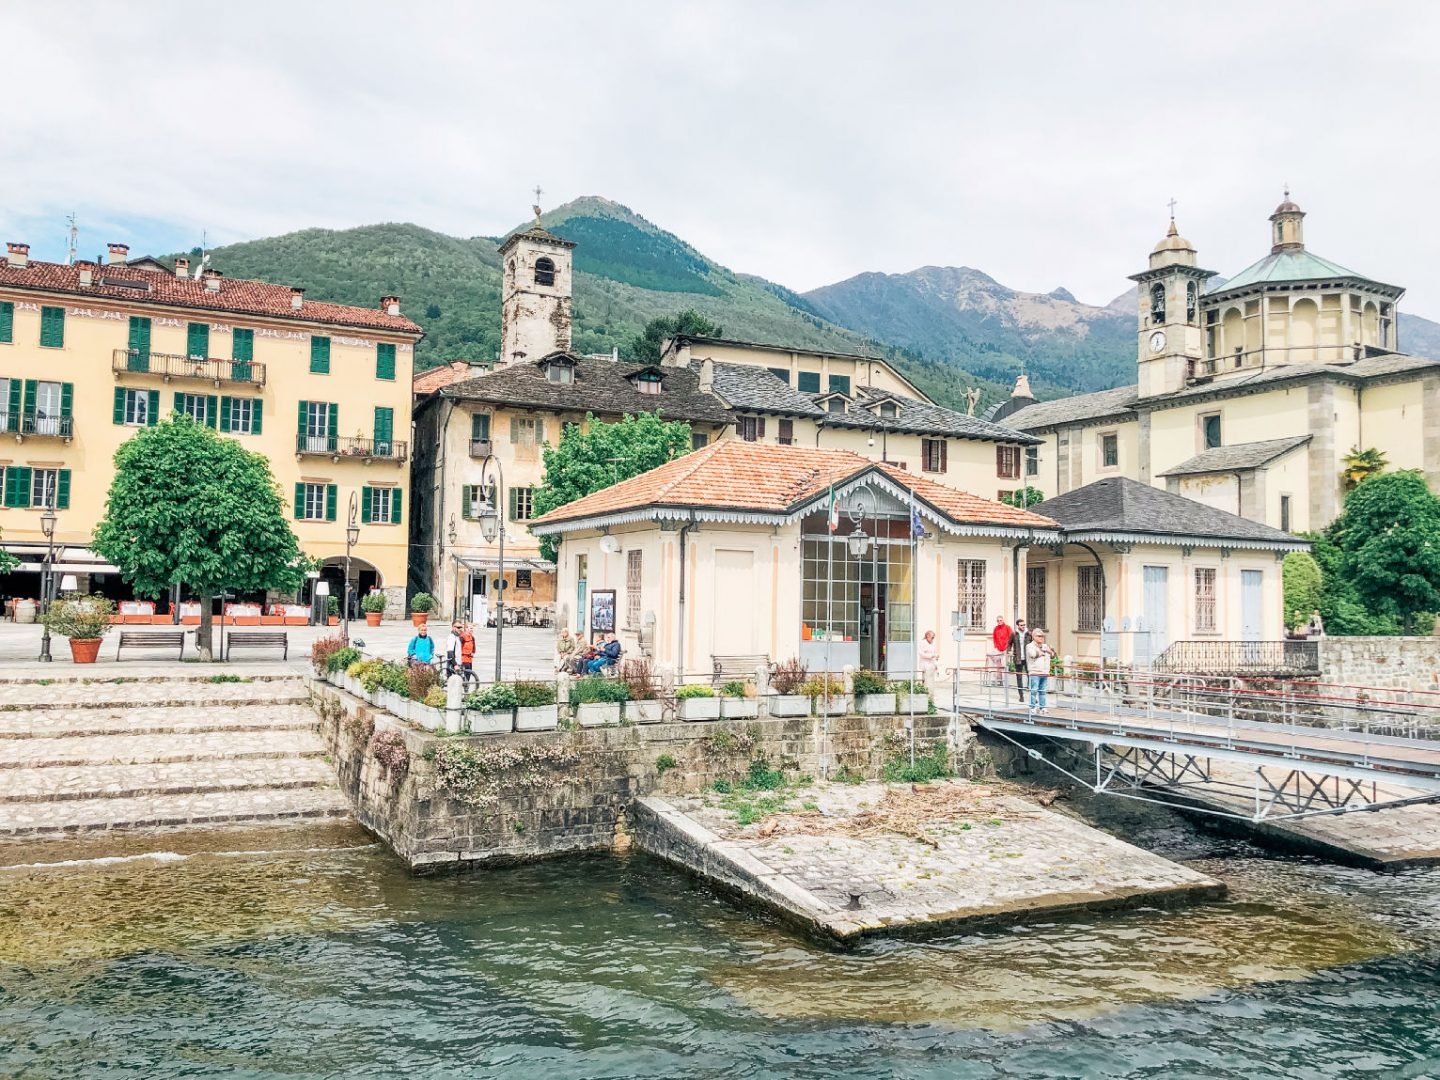 The ferry terminal on Cannobio On Lake Maggiore, Italy, 